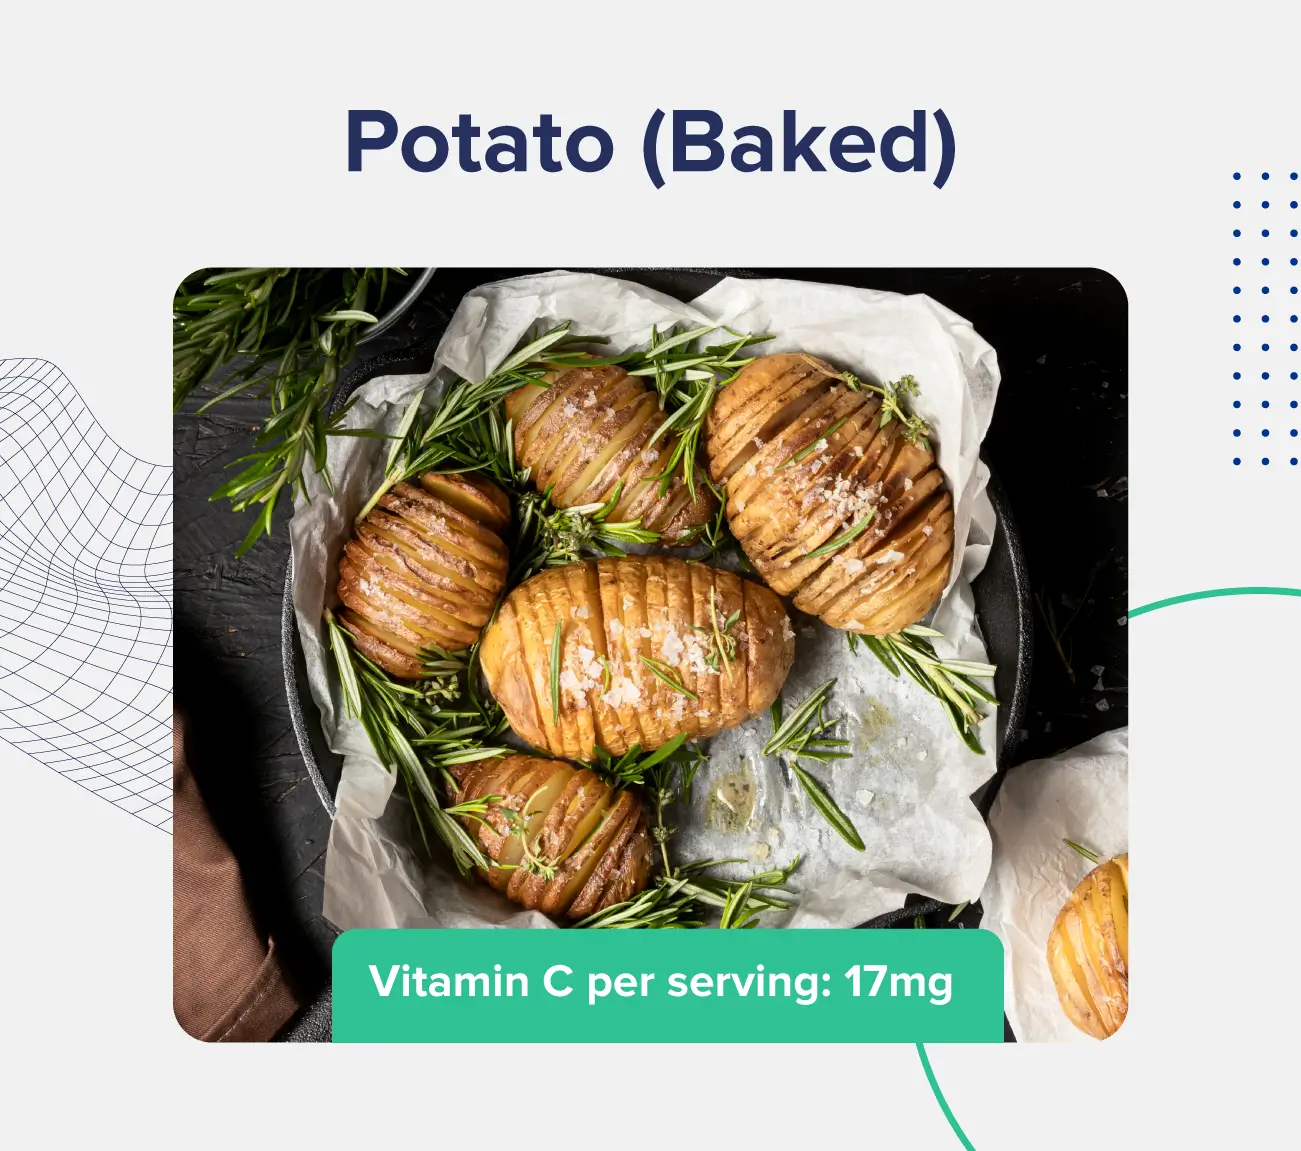 A graphic entitled "potato (baked)" depicting a plate of sliced and baked potatoes in addition to a description of the vitamin C content (17 milligrams per serving)